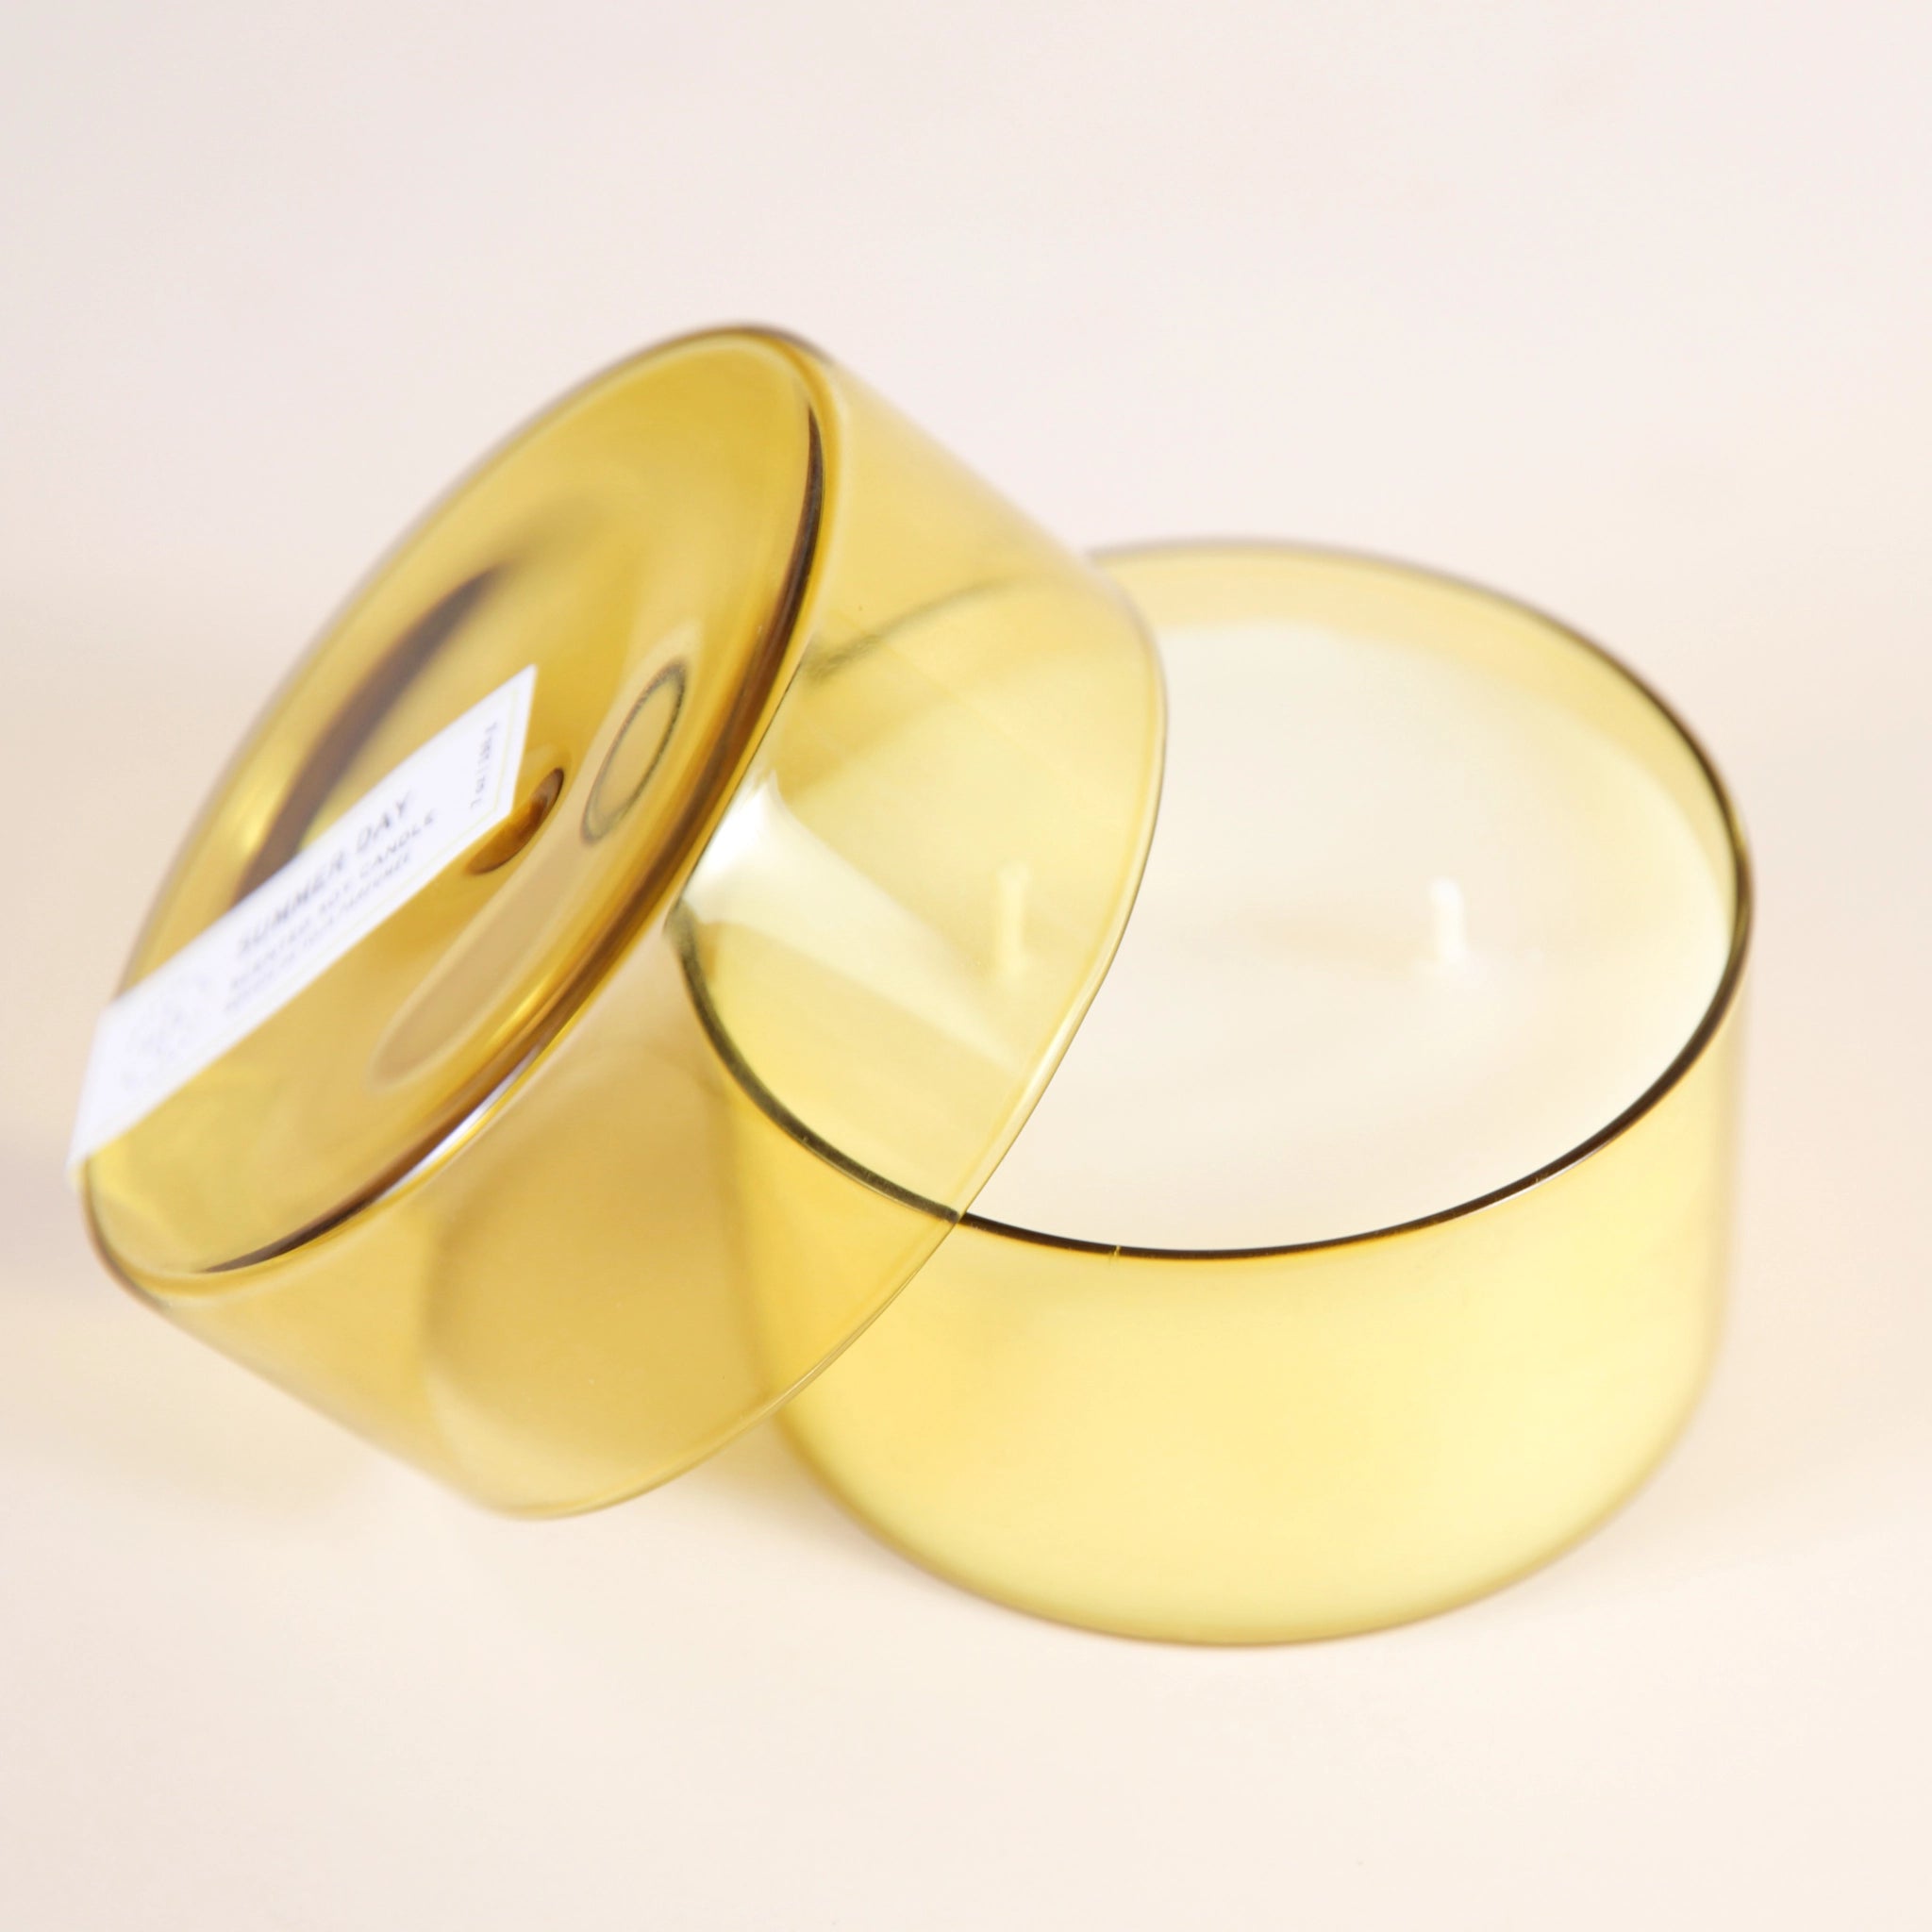 On a cream background is a yellow glass candle with a white double wick candle inside along with a coordinating yellow glass lid. 